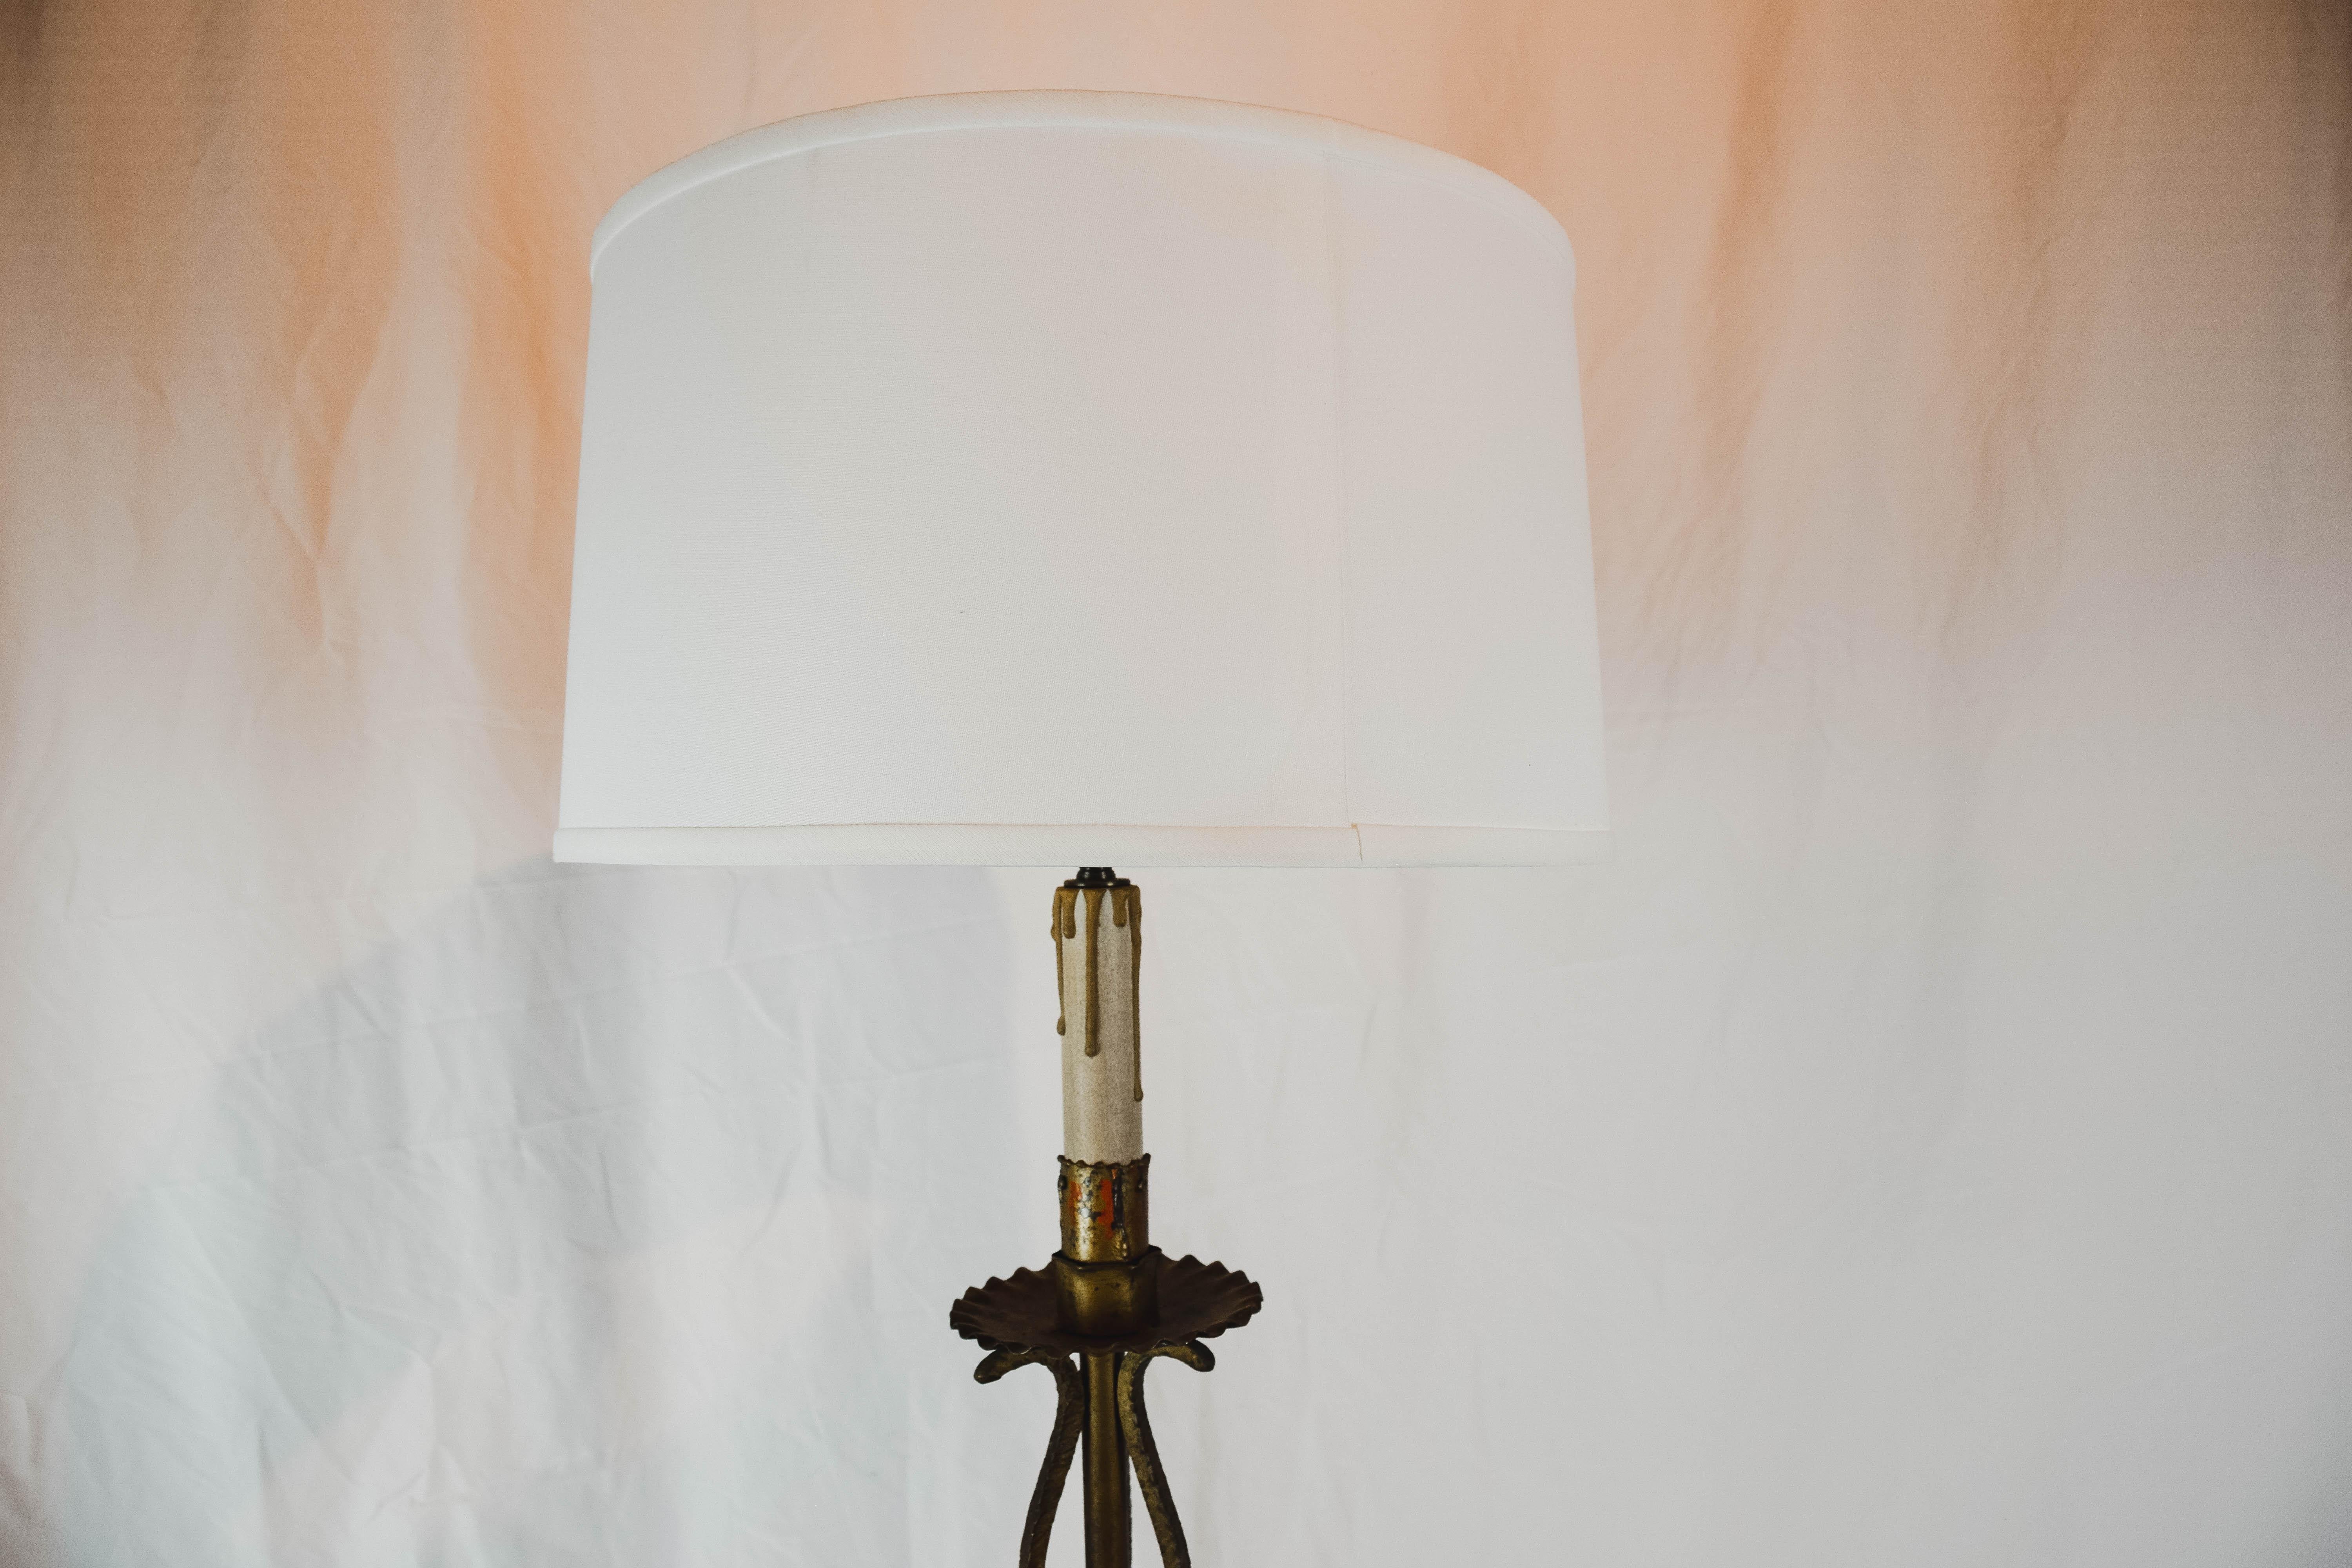 French tripod candlestick table lamp with a faux candlestick. Drum shade is 15